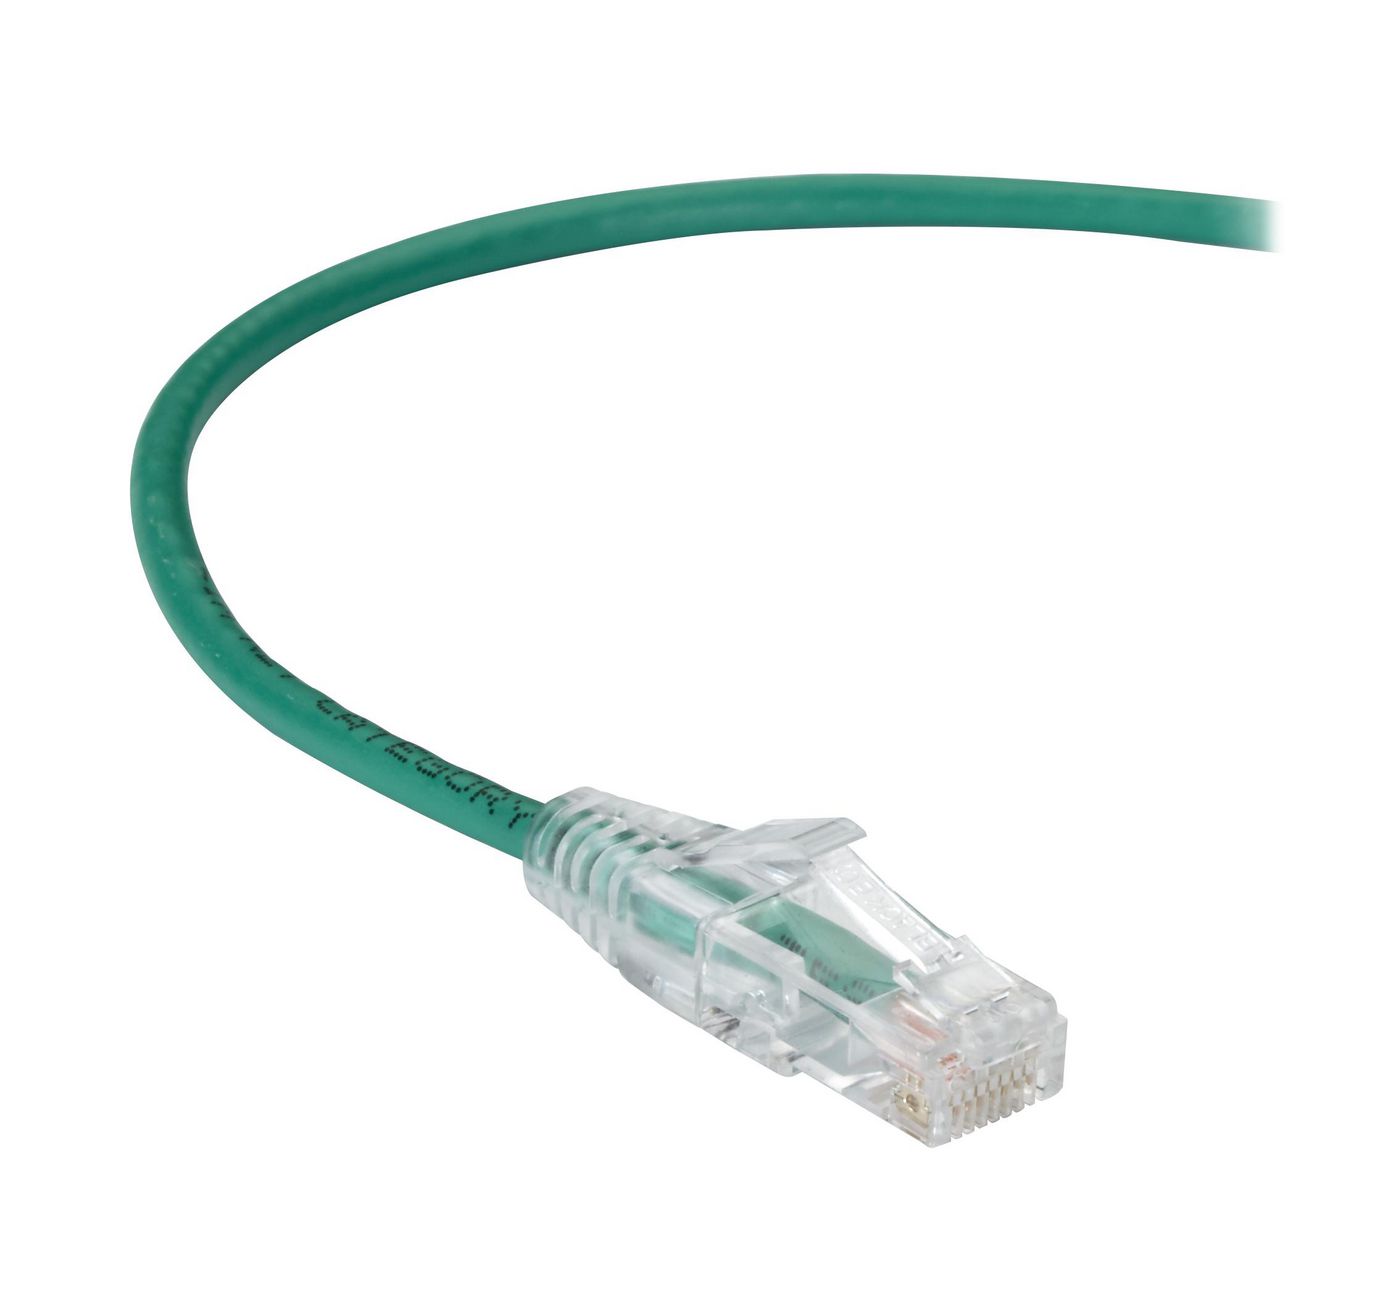 Ultra-thin Patch Cable - CAT6a - Utp - 28awg 250MHz - 3.5m - Green